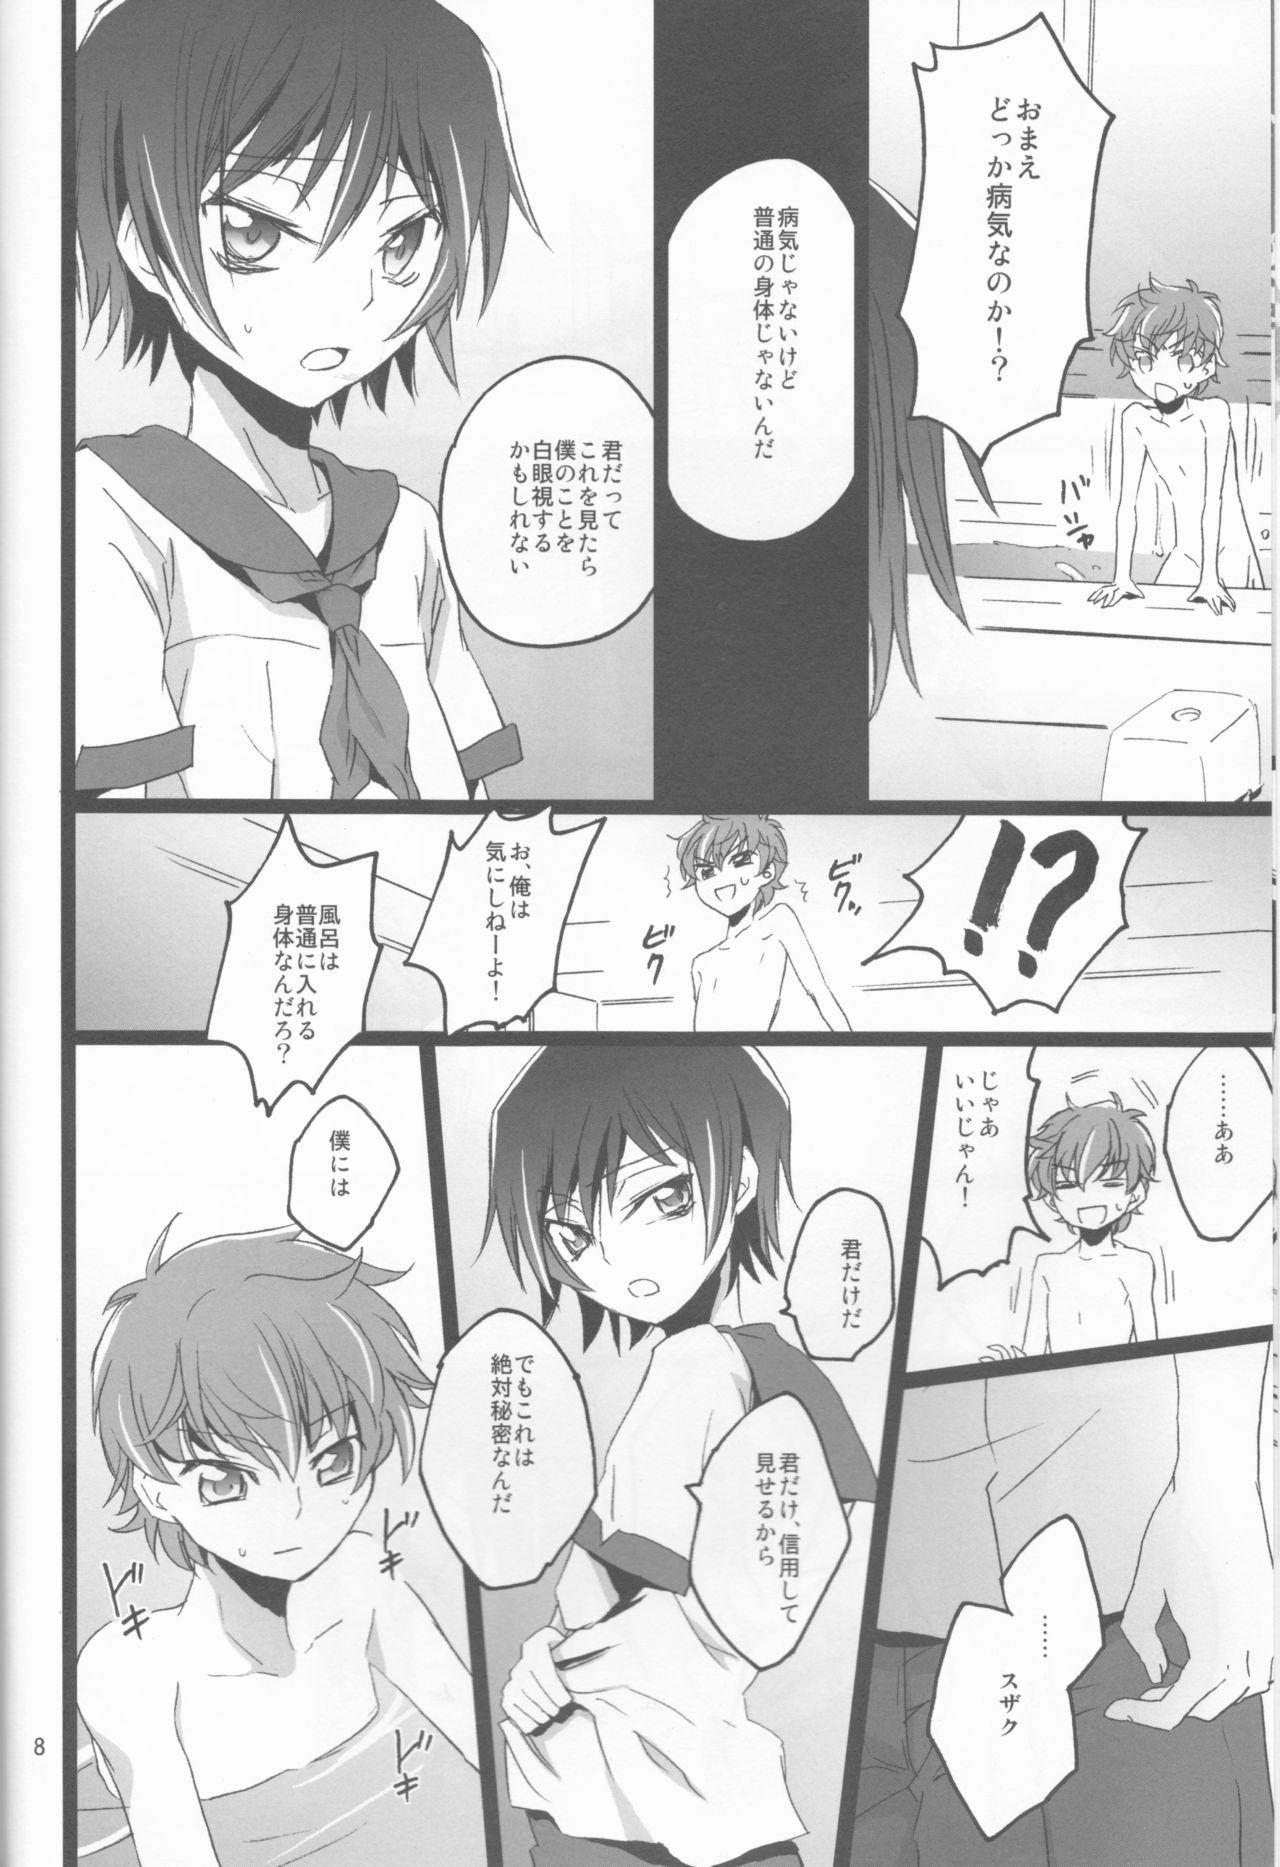 Pale Chameleon Girl - Code geass Gay Shorthair - Page 8